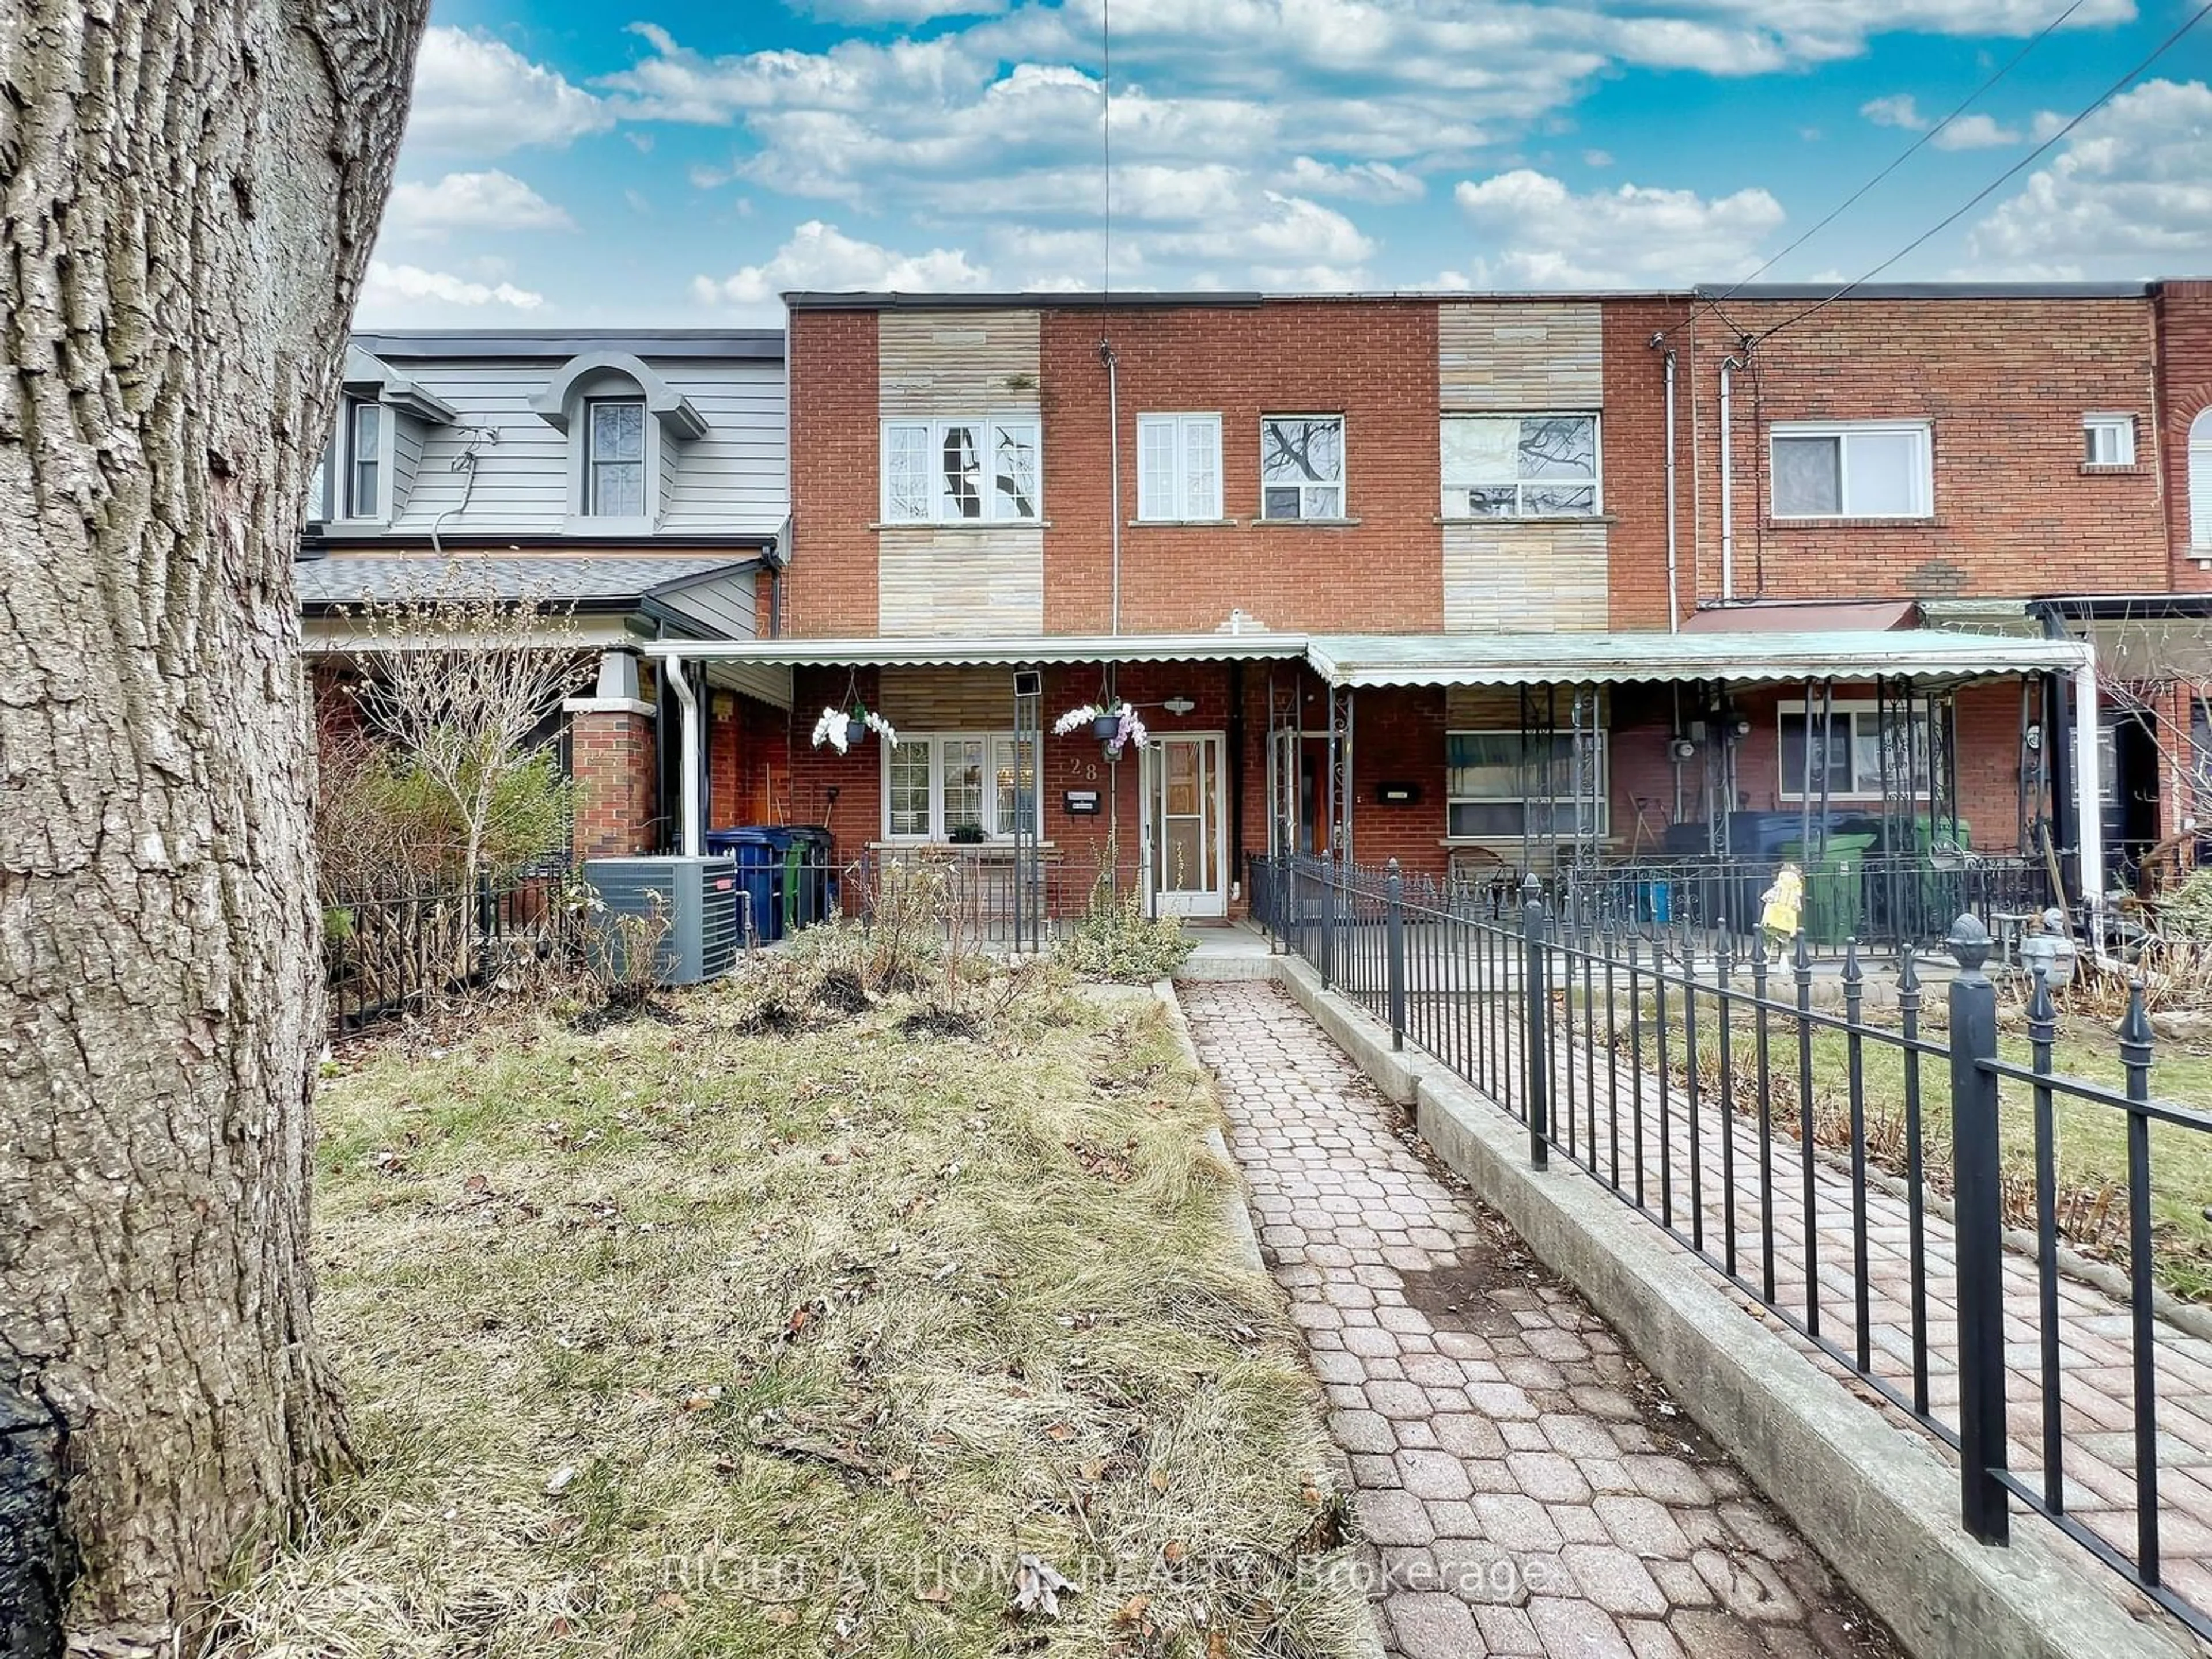 A pic from exterior of the house or condo for 28 Fennings St, Toronto Ontario M6J 3B8